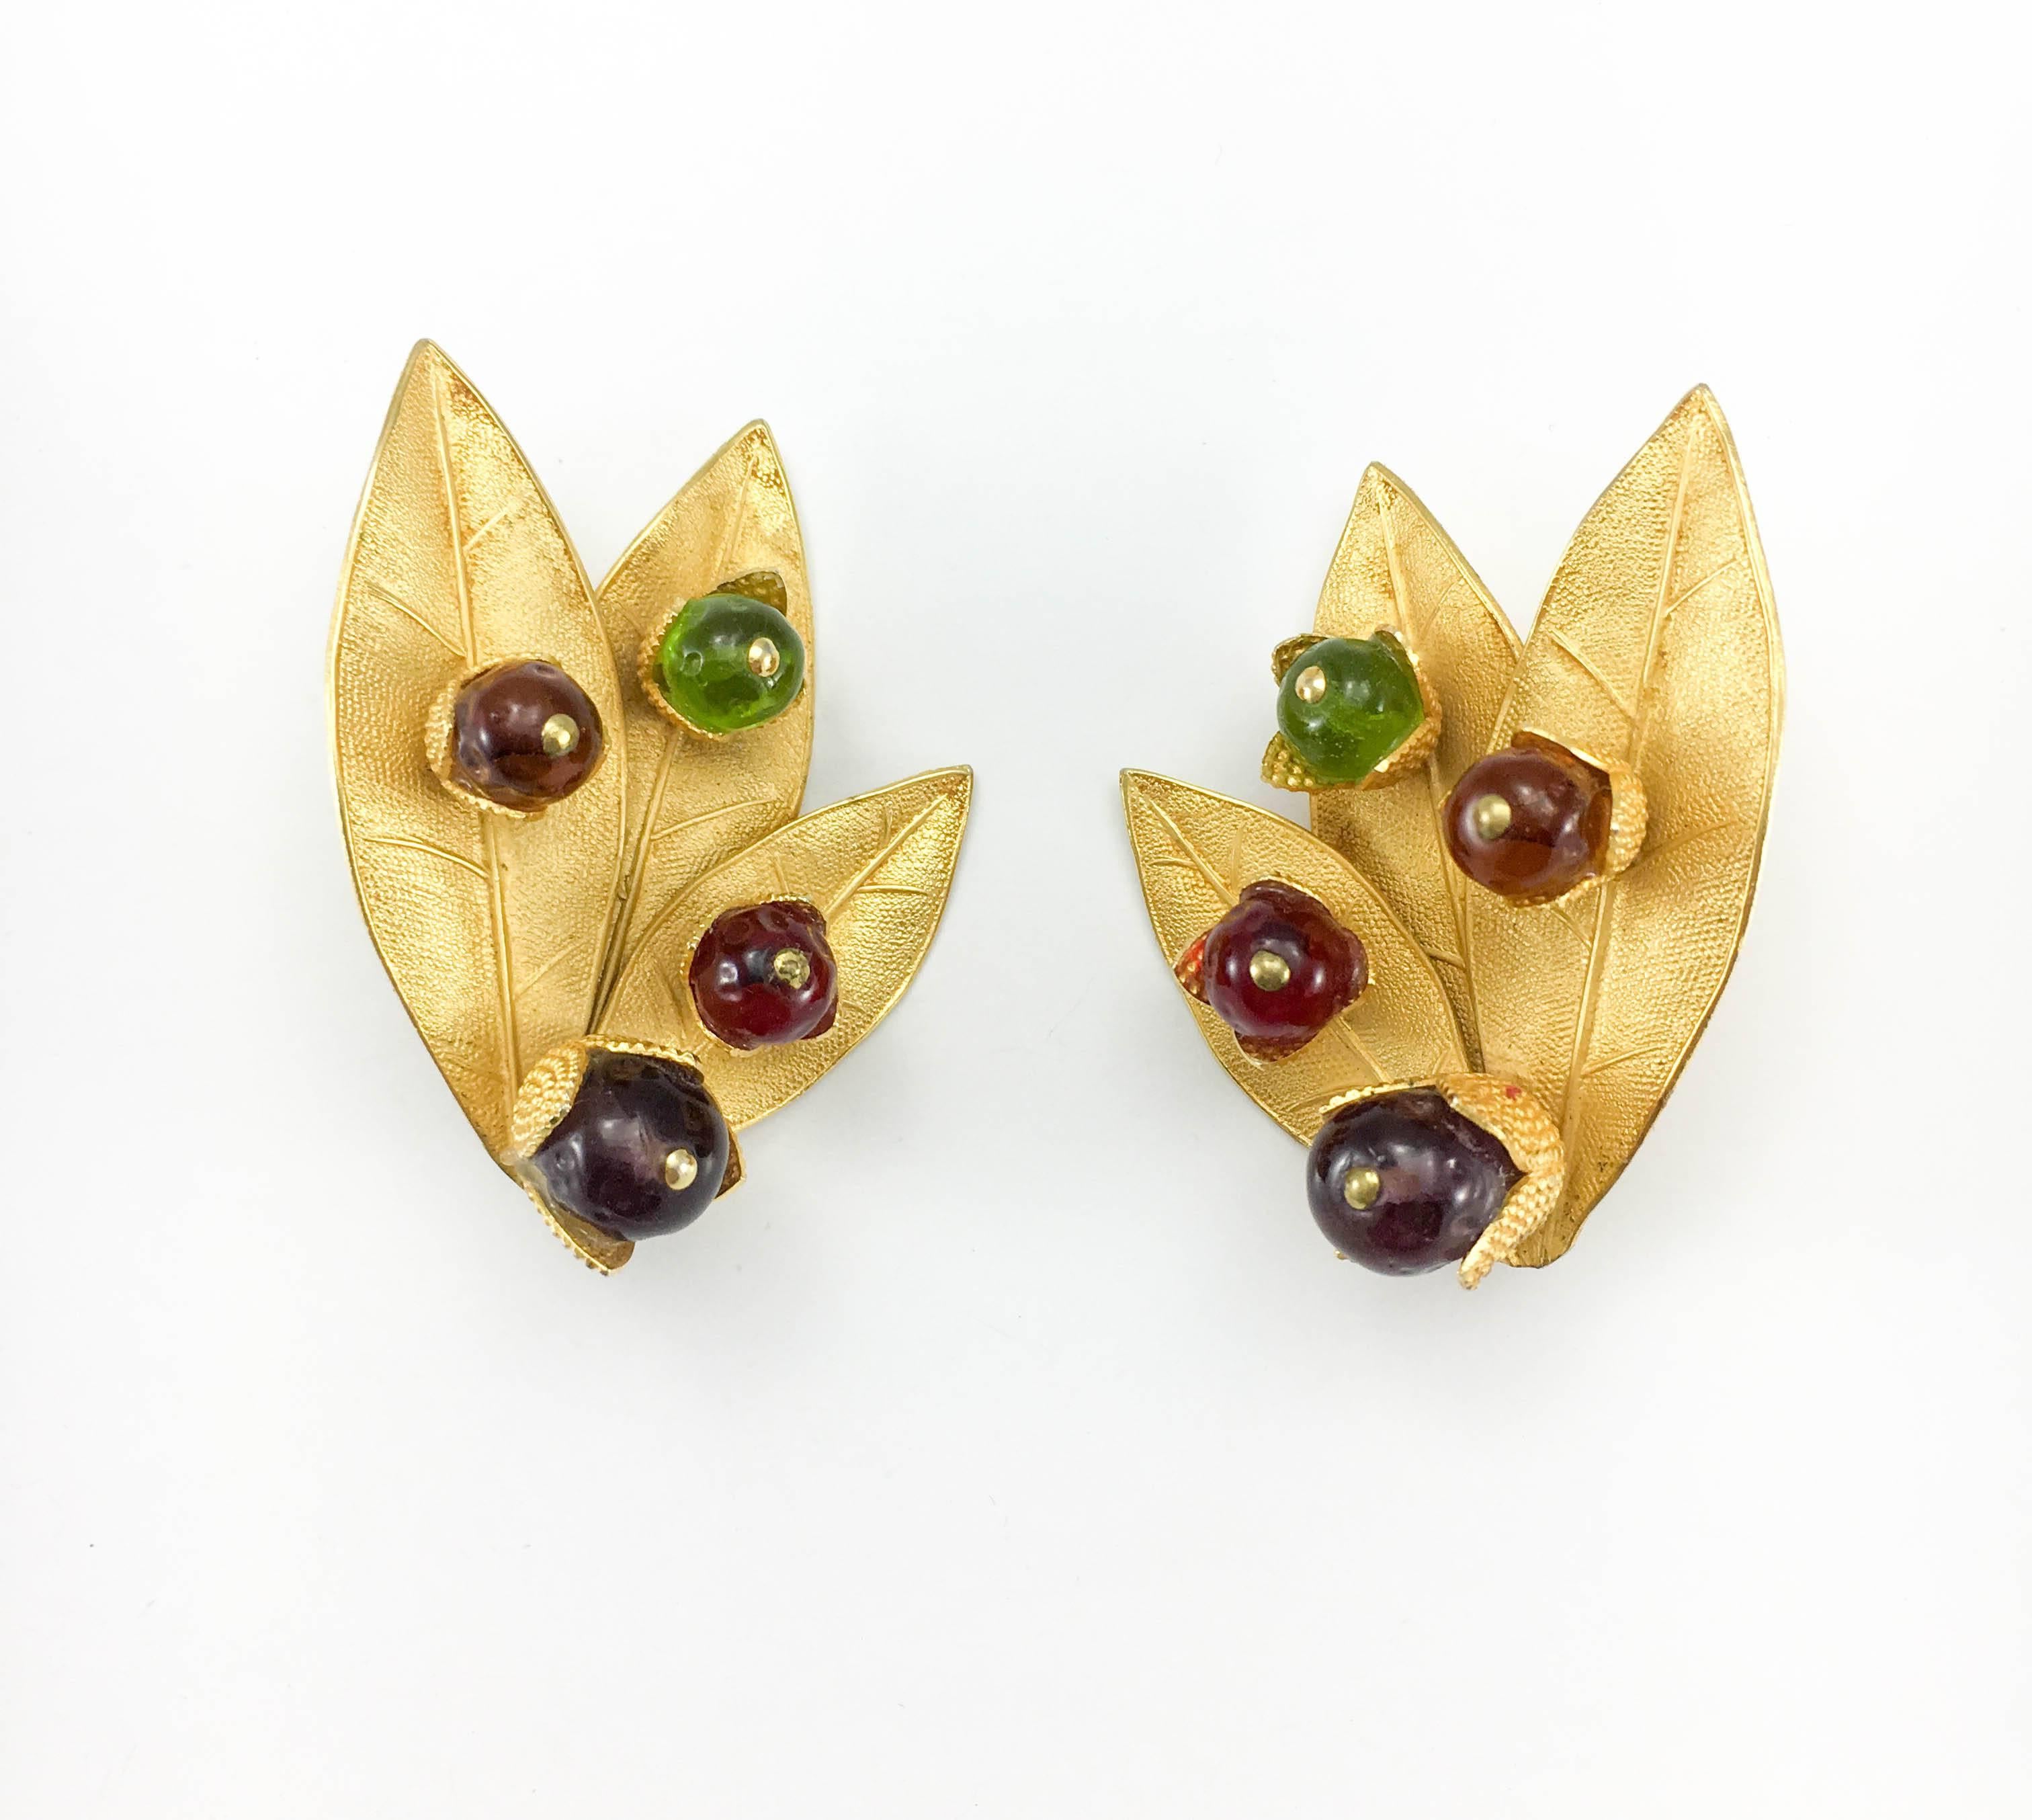 Striking Vintage Dominique Aurientis Leaf Clip-On Earrings. Made in the 1980’s, these earrings feature gilt hardware in the shape of very detailed three leaves adorned with four resin beads in purple, red, orange and green. The flamboyant design and